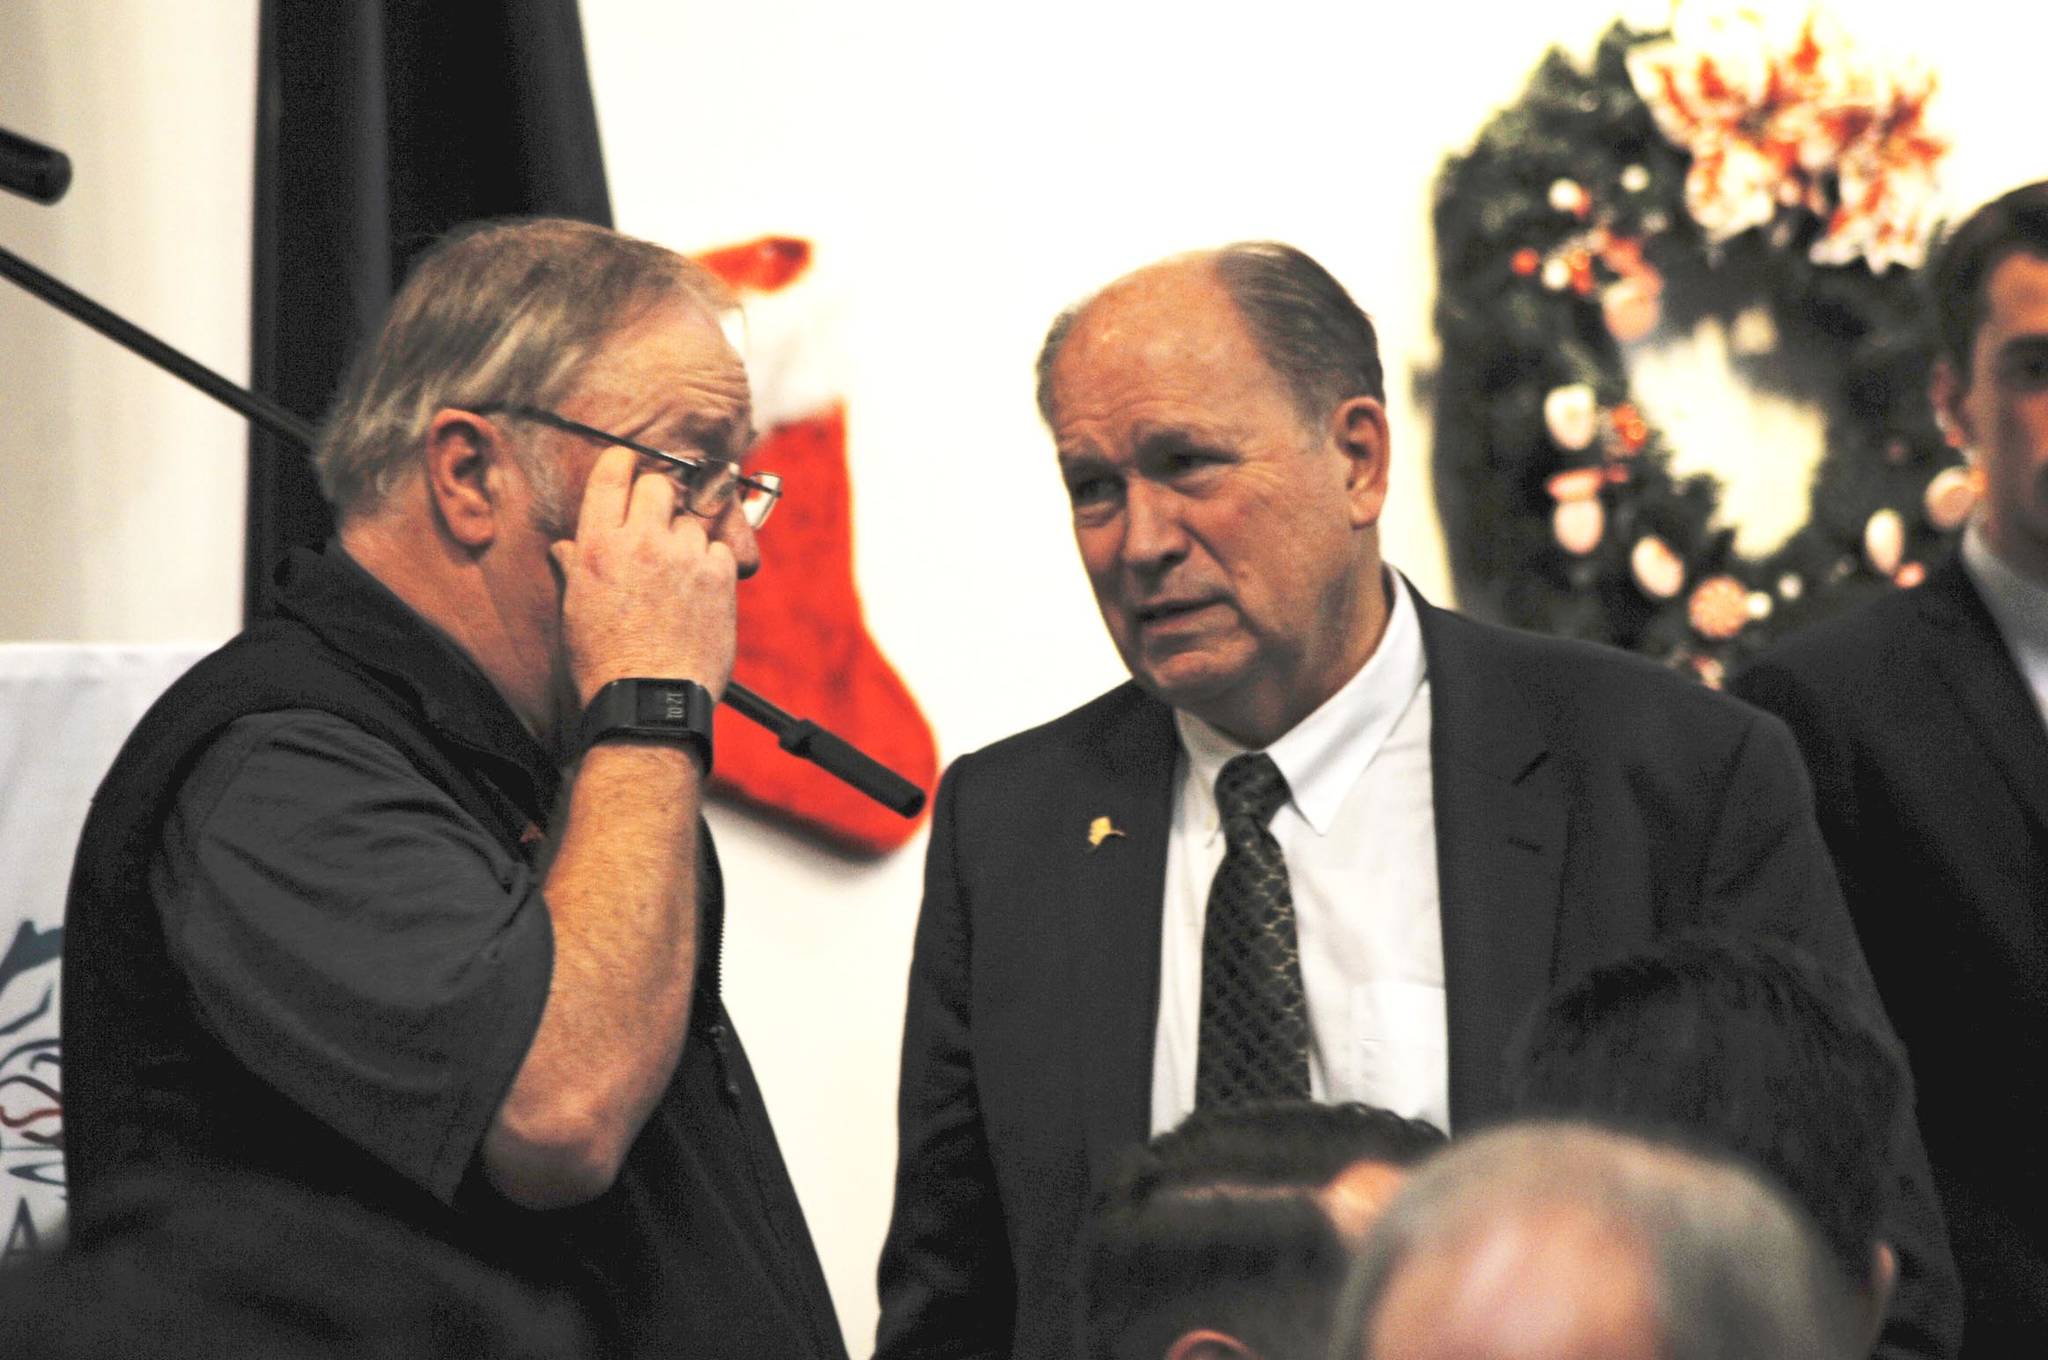 Gov. Bill Walker (right) speaks to Rep. Mike Chenault (R-Nikiski) before the beginning of a joint luncheon of the Kenai and Soldotna chambers of commerce on Tuesday, Dec. 19, 2017 in Kenai, Alaska. Walker visited Kenai on Tuesday to address the chambers of commerce with updates about the Alaska LNG Project. (Photo by Elizabeth Earl/Peninsula Clarion)